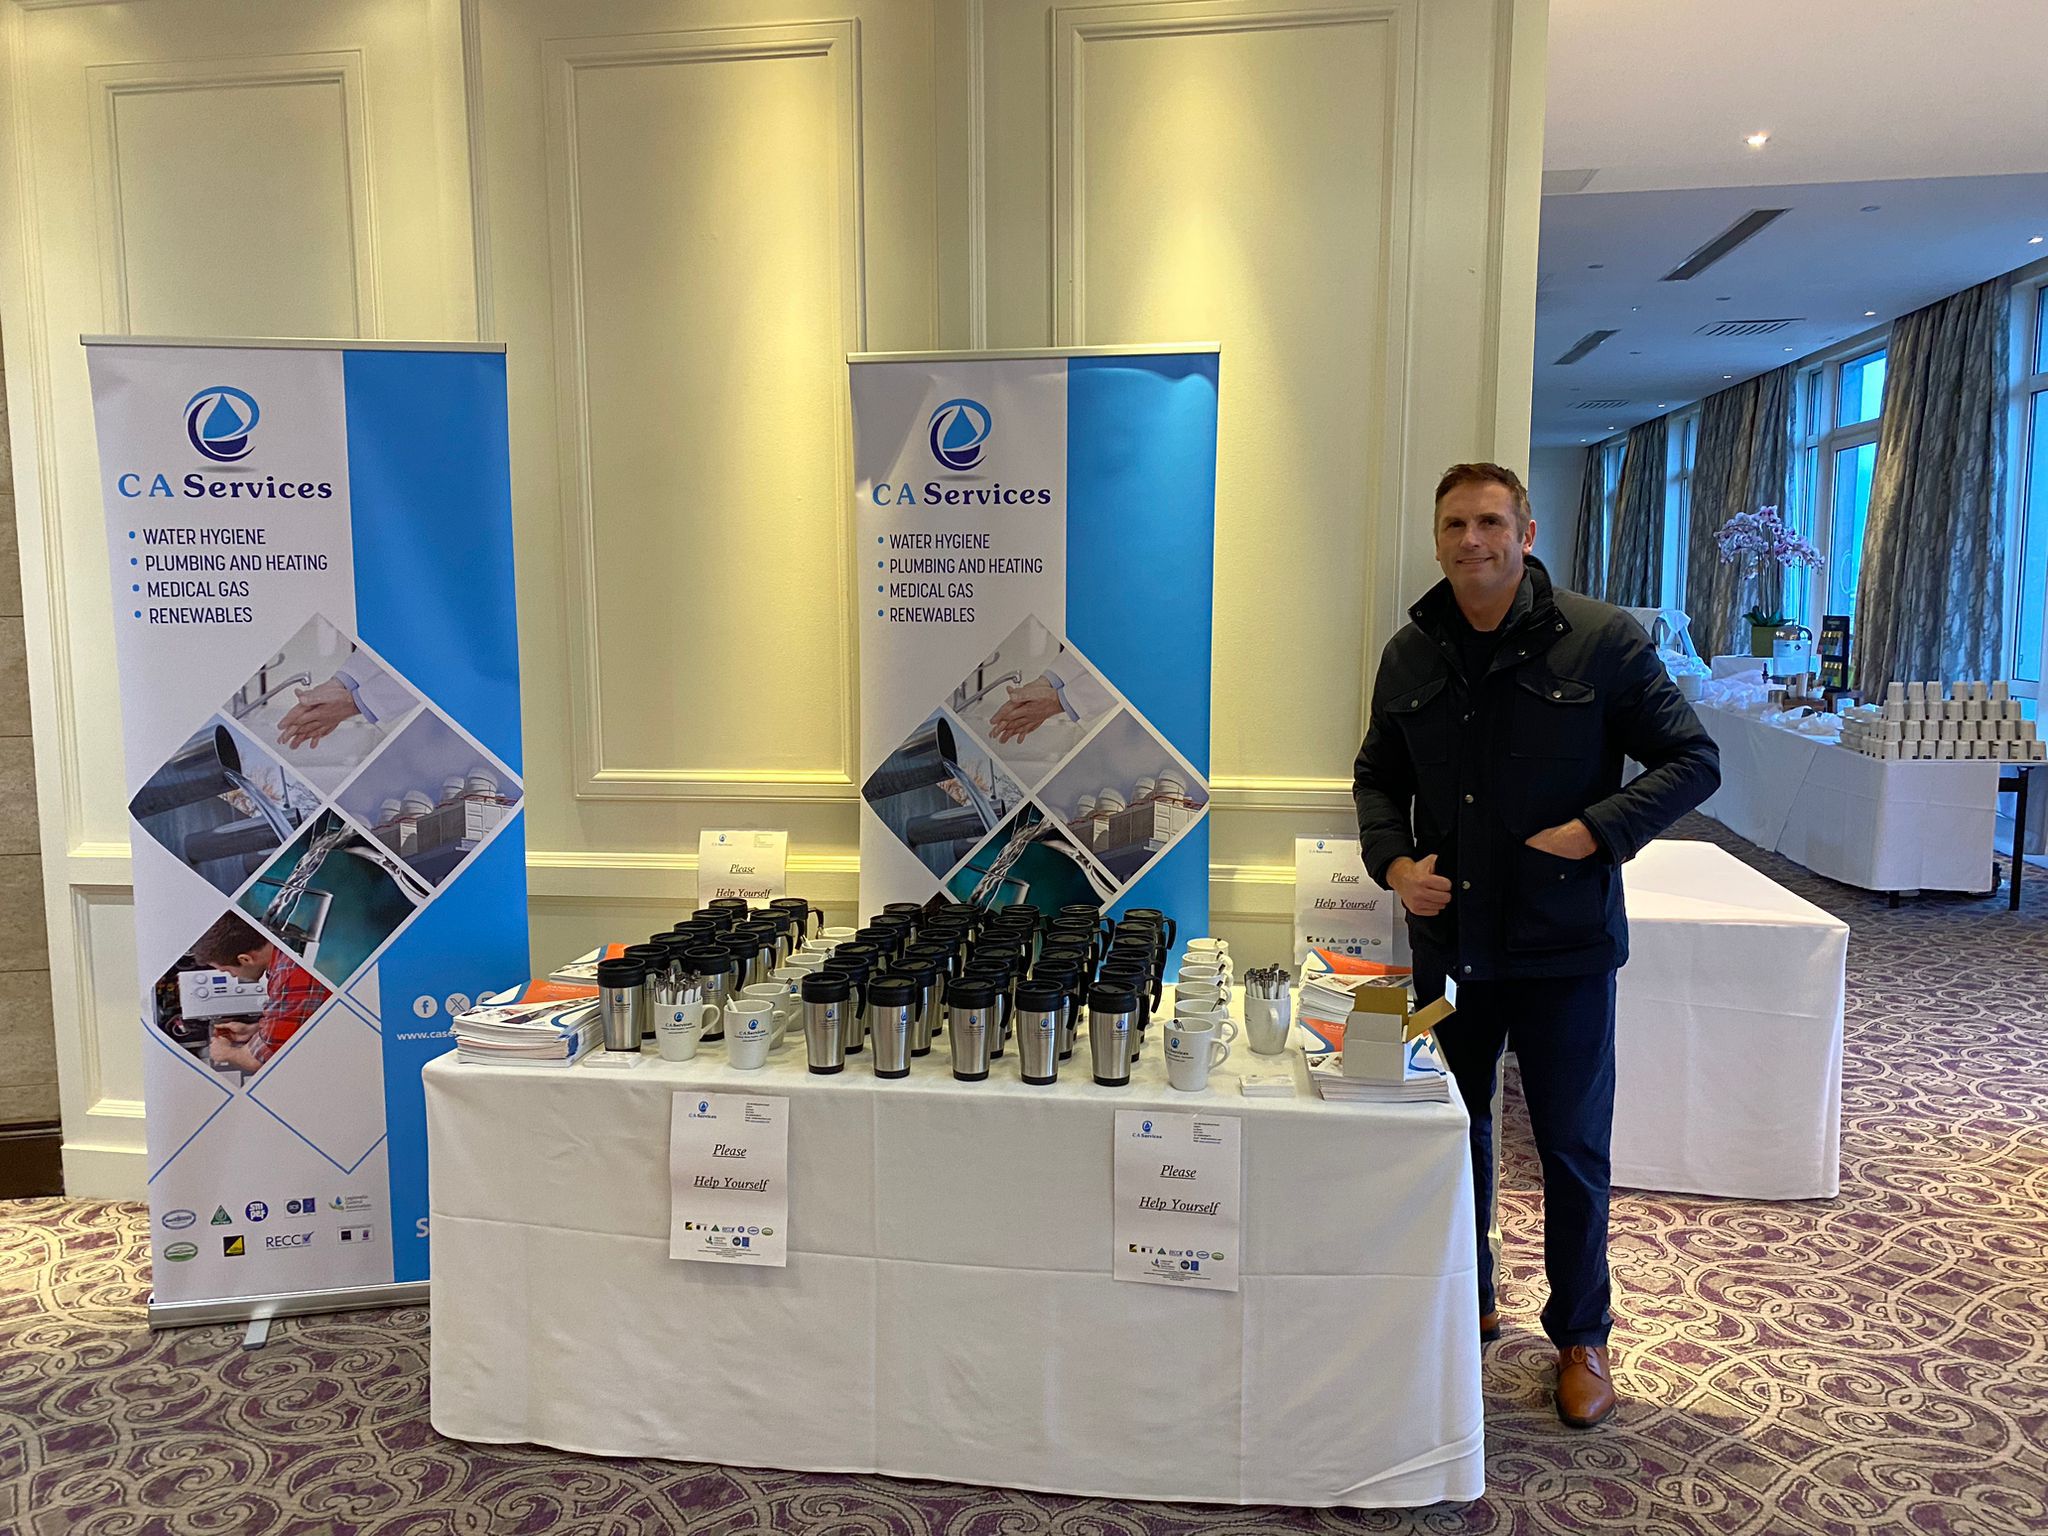 Promoting our services at a recent conference